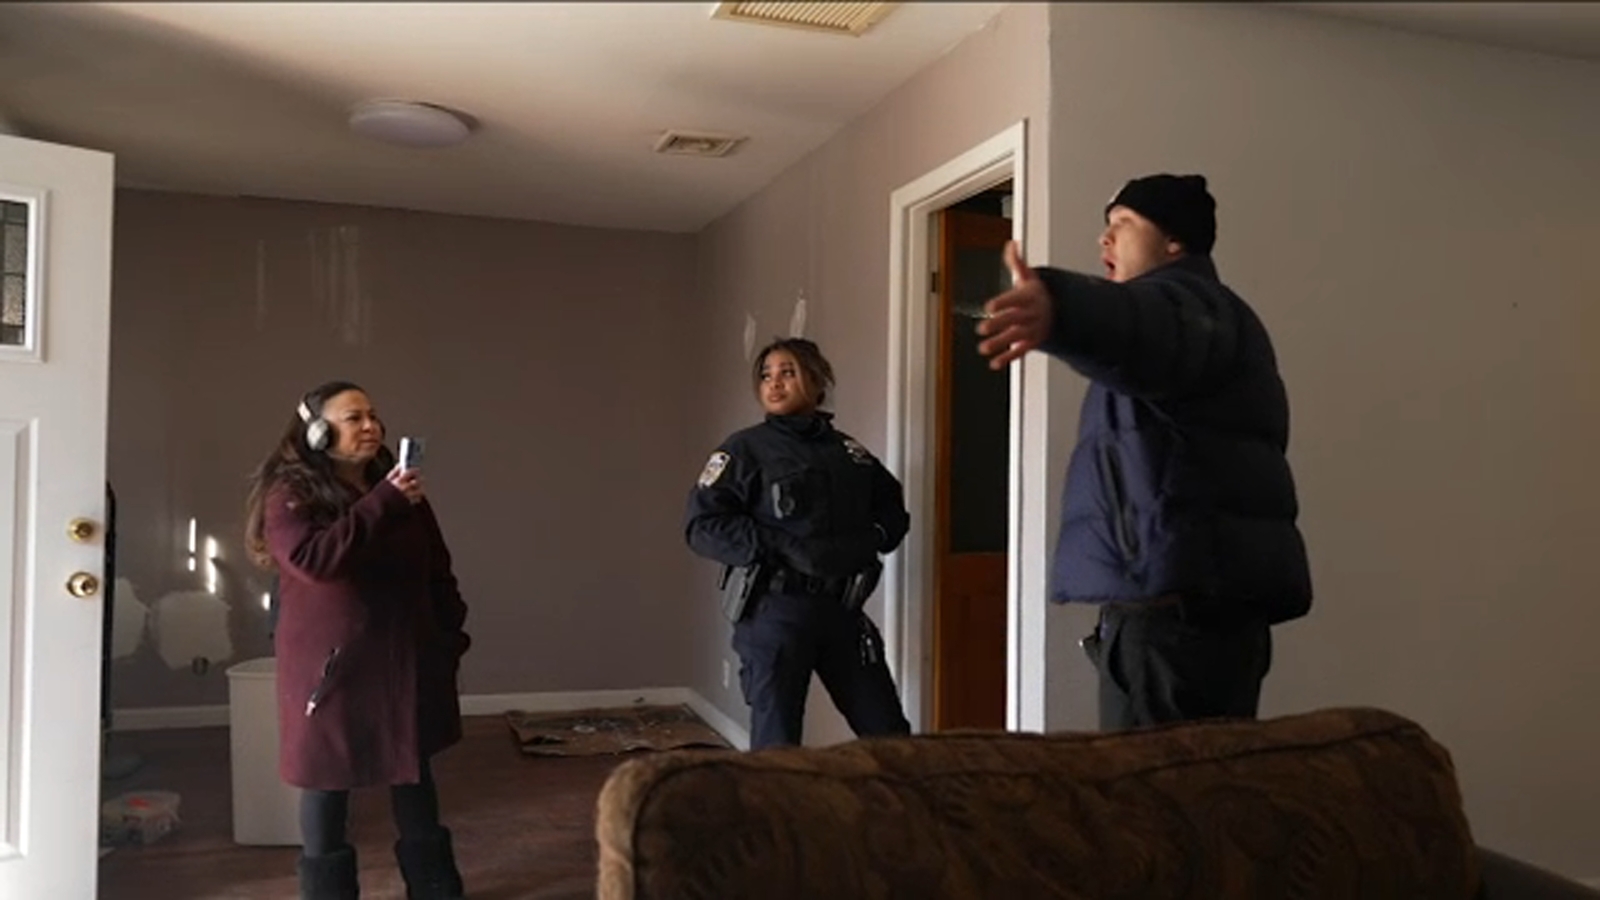 Unexpected Lockout Drama: New York Homeowner's Battle Against House Squatters